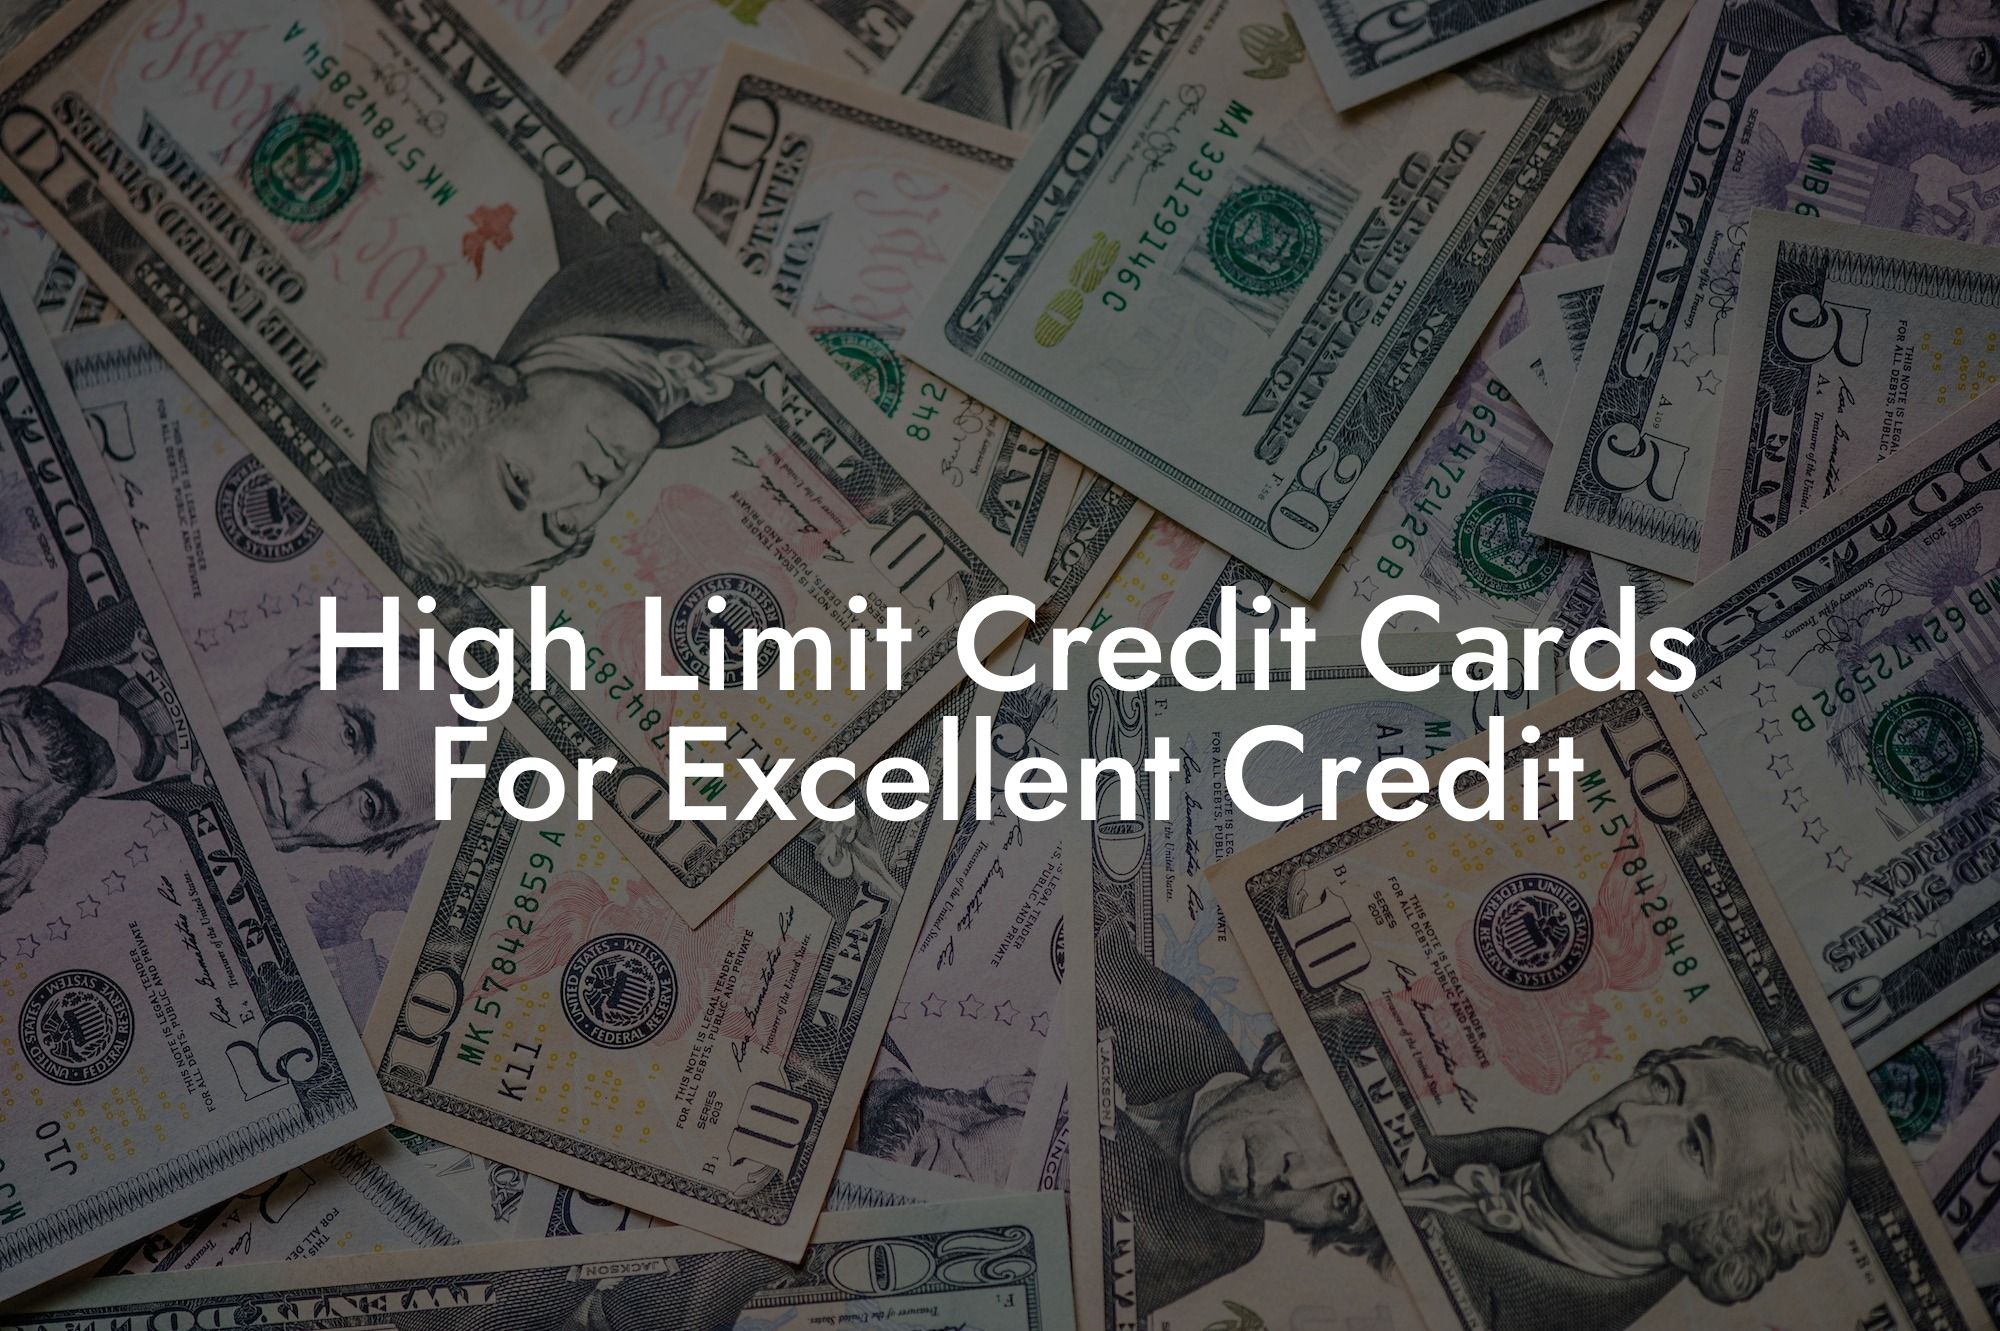 High Limit Credit Cards For Excellent Credit